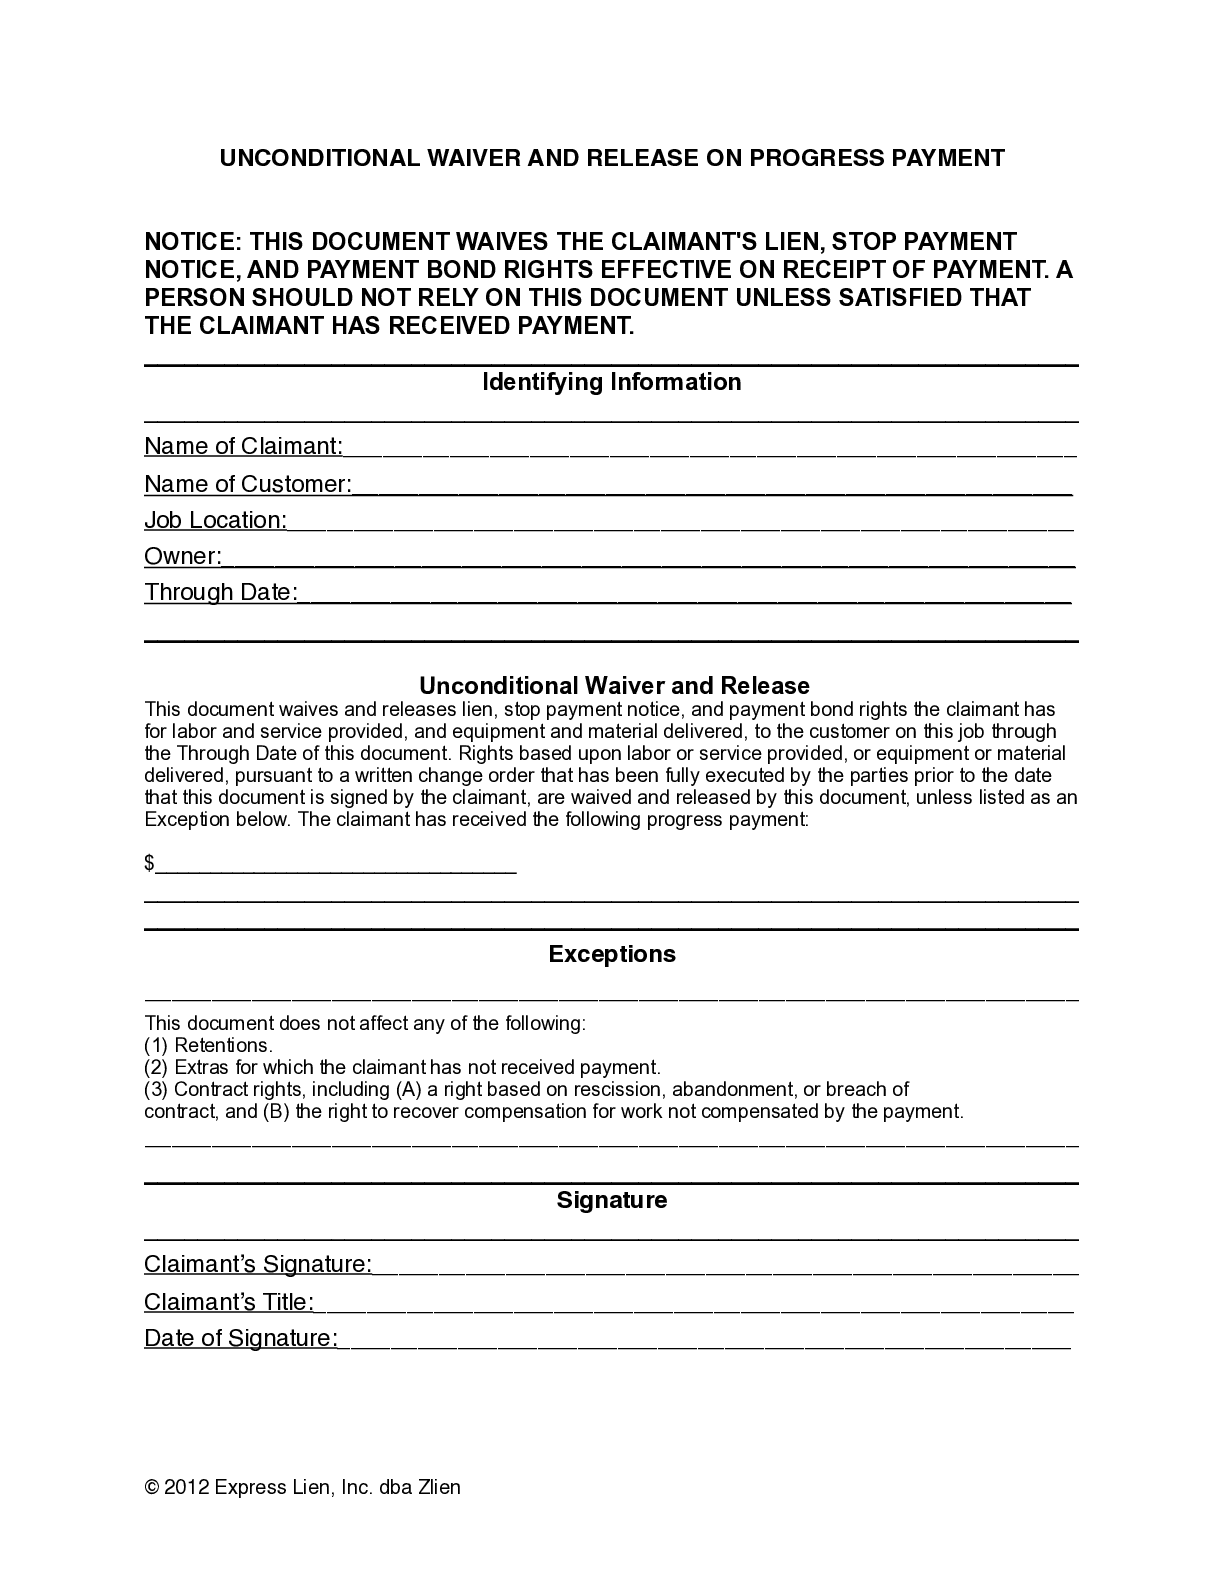 Virginia Partial Unconditional Lien Waiver Form - free from